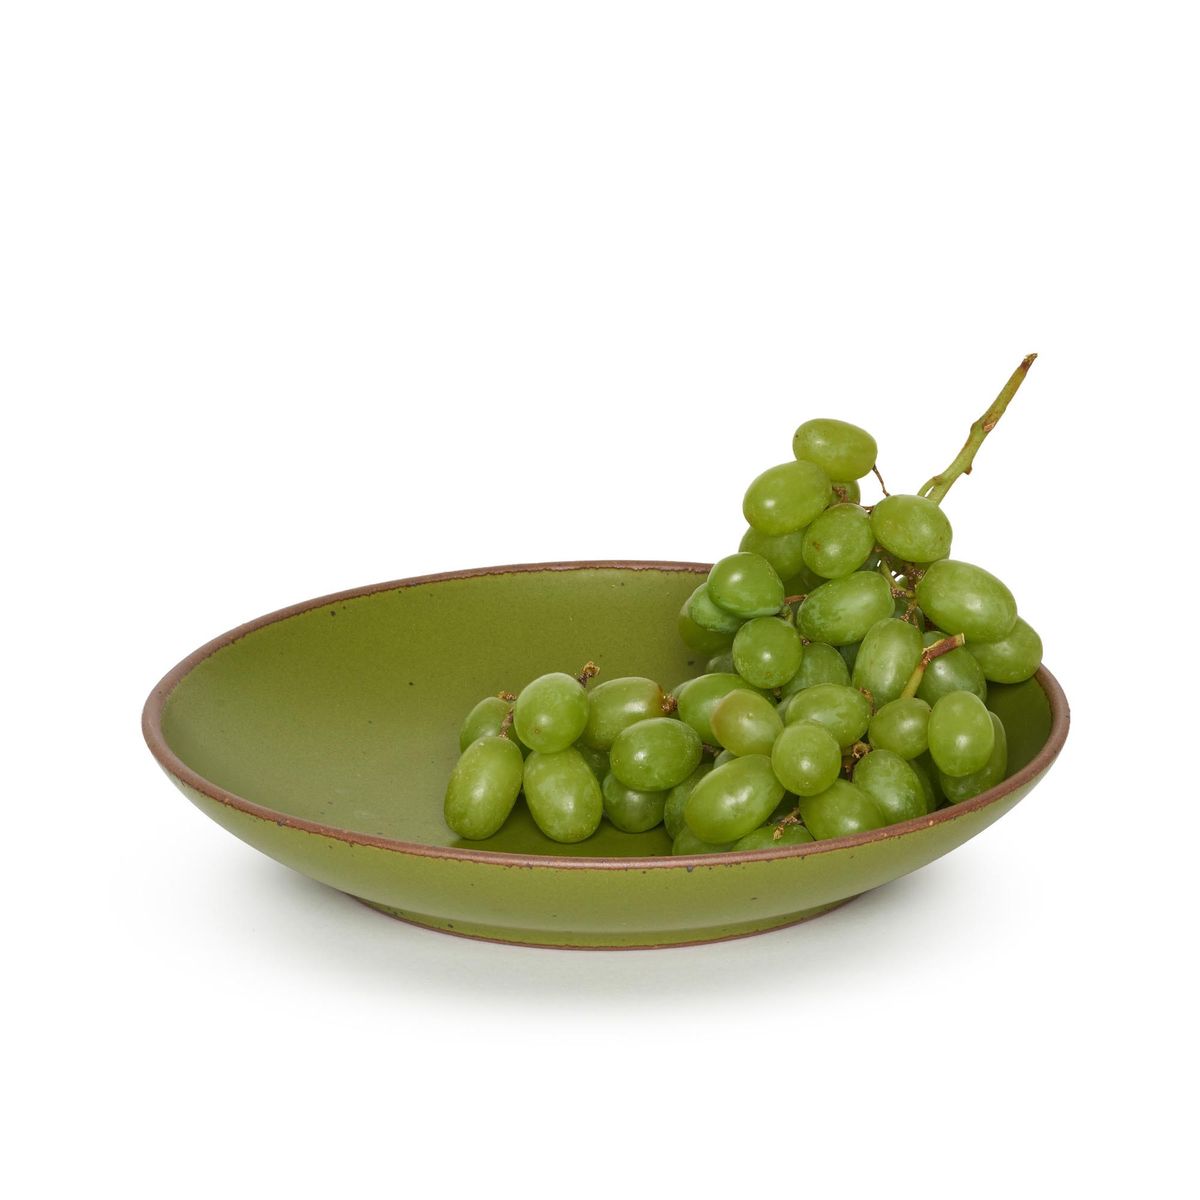 The Coupe in Fiddlehead, a mossy, olive green. Pictured with a bunch of green grapes.